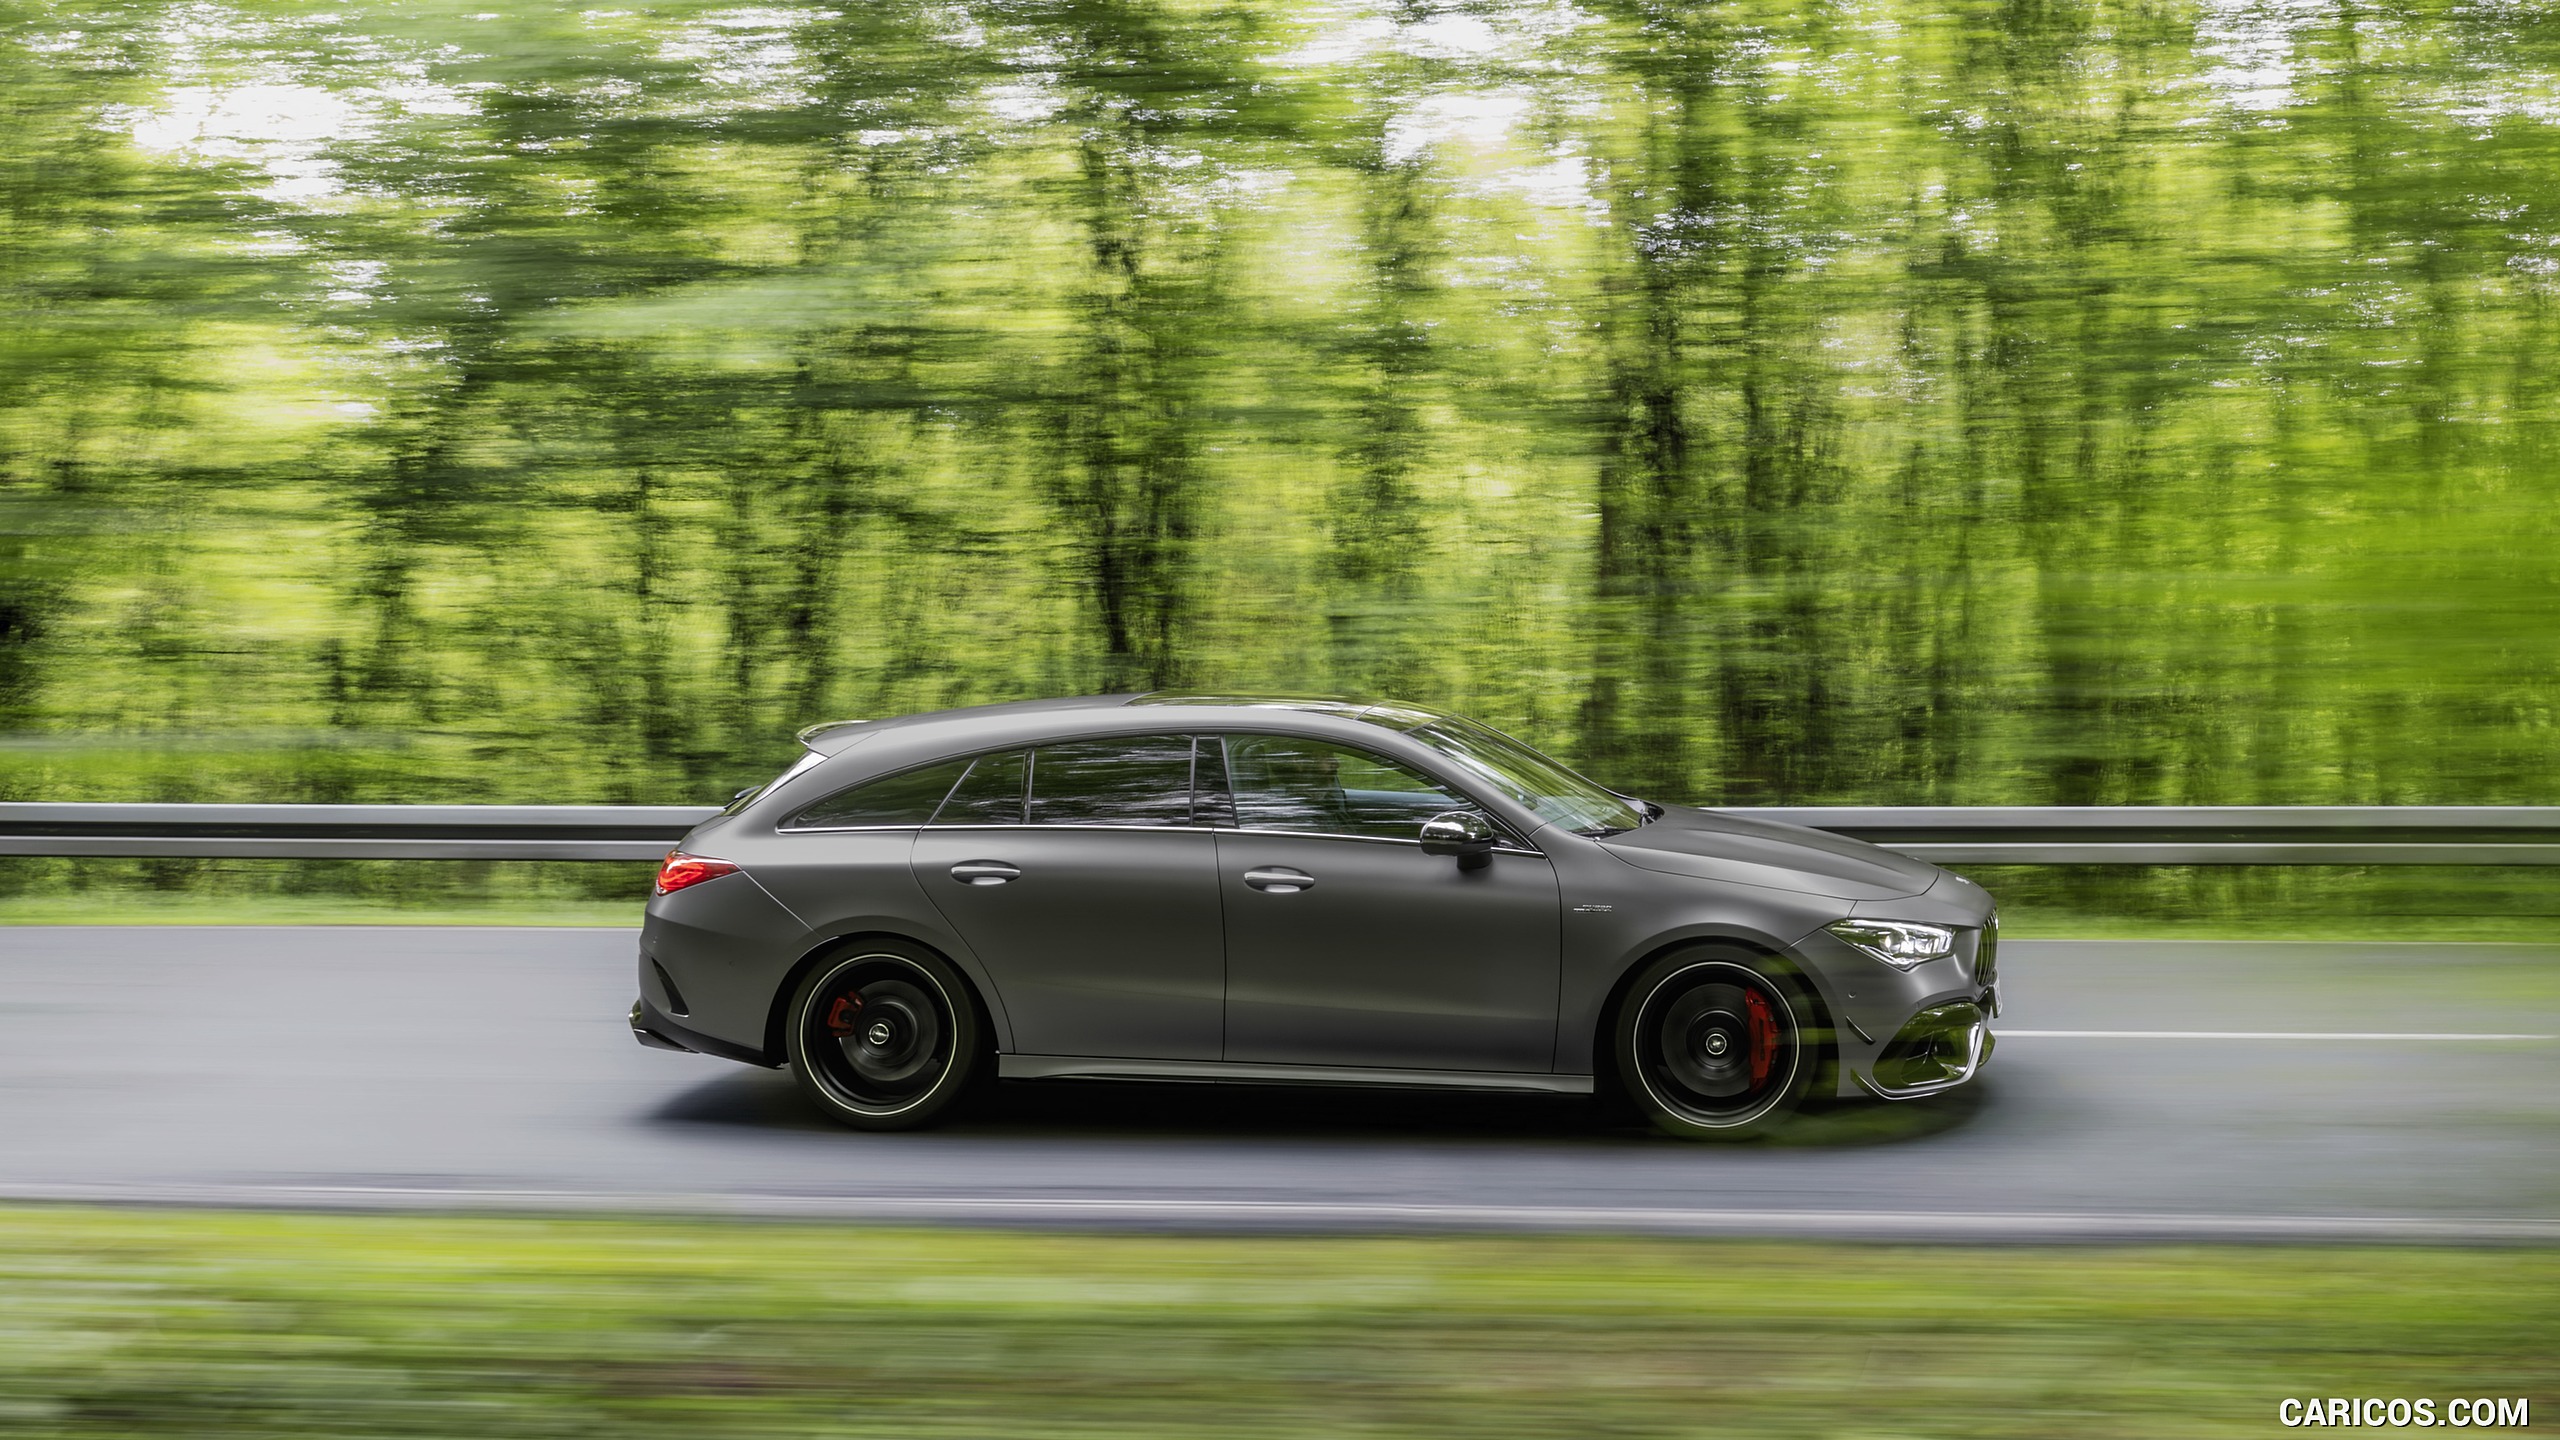 2020 Mercedes-AMG CLA 45 S 4MATIC+ Shooting Brake - Side, #6 of 35